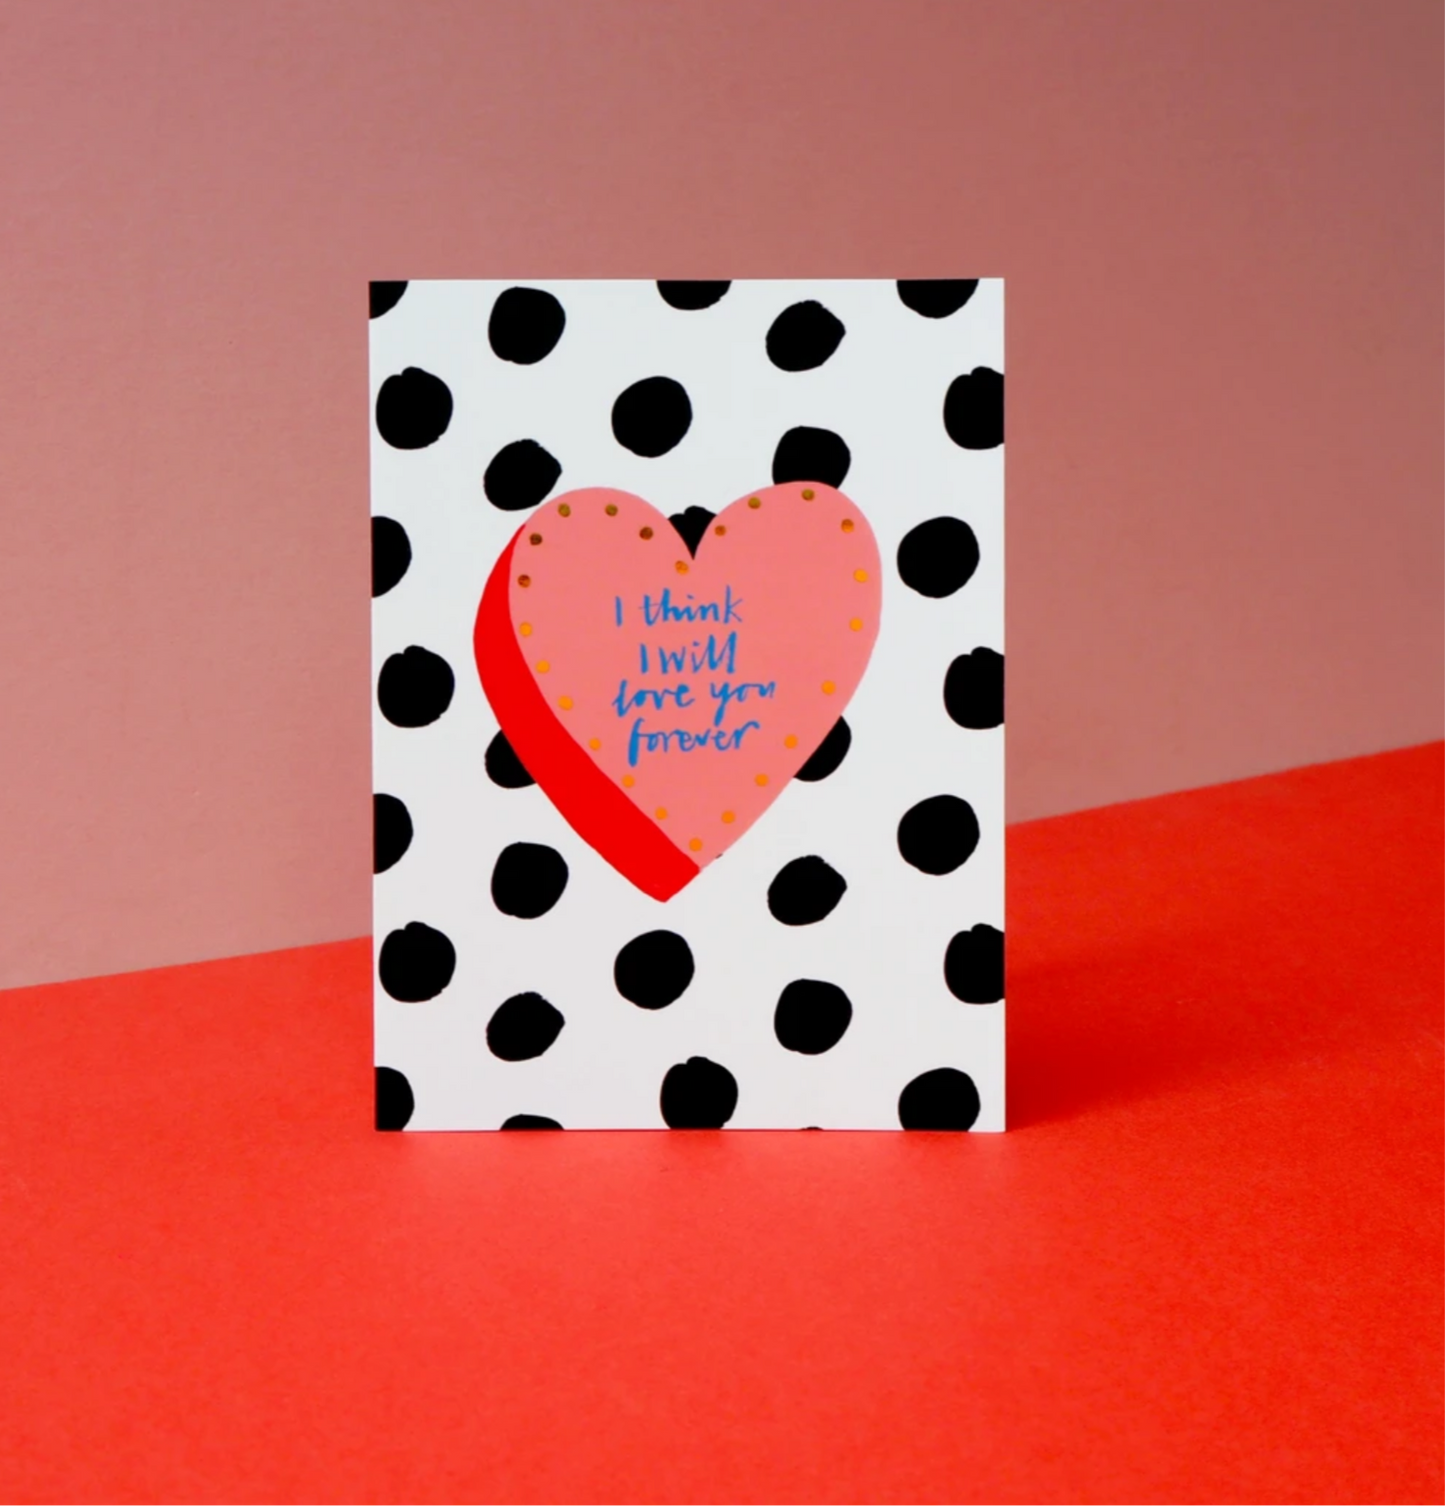 ‘I think I will love you forever’ card